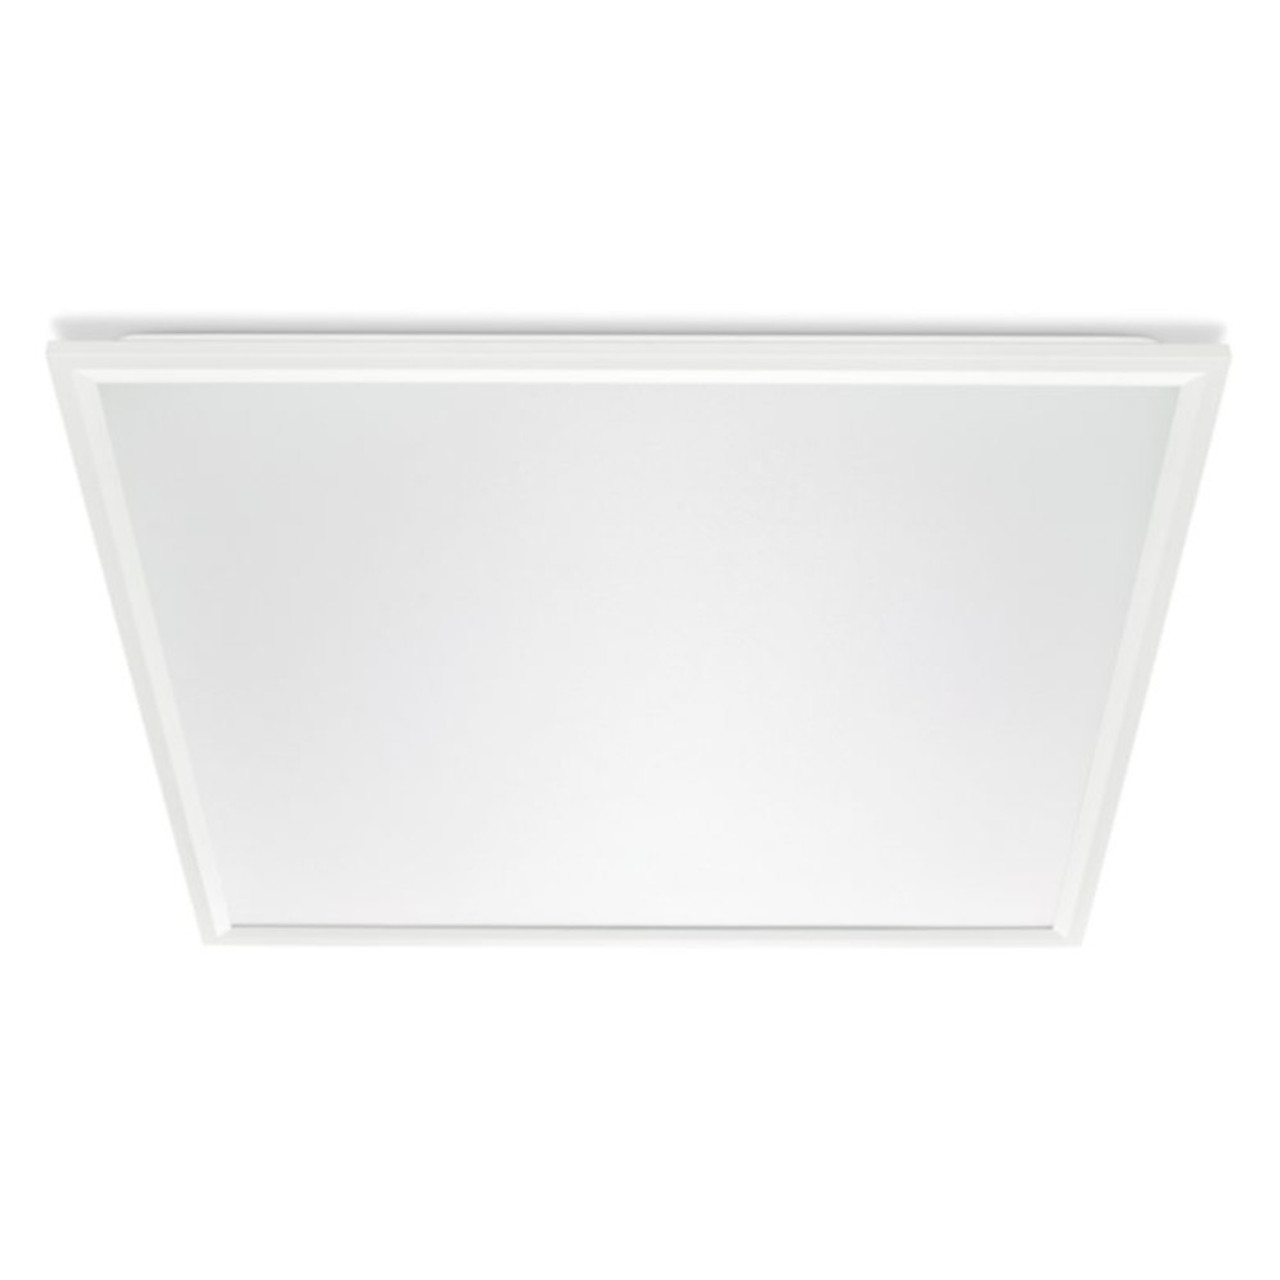 28.5W LED Ecolink Panel 840 Cool White 600mm x 600mm 3600lm NOC Philips